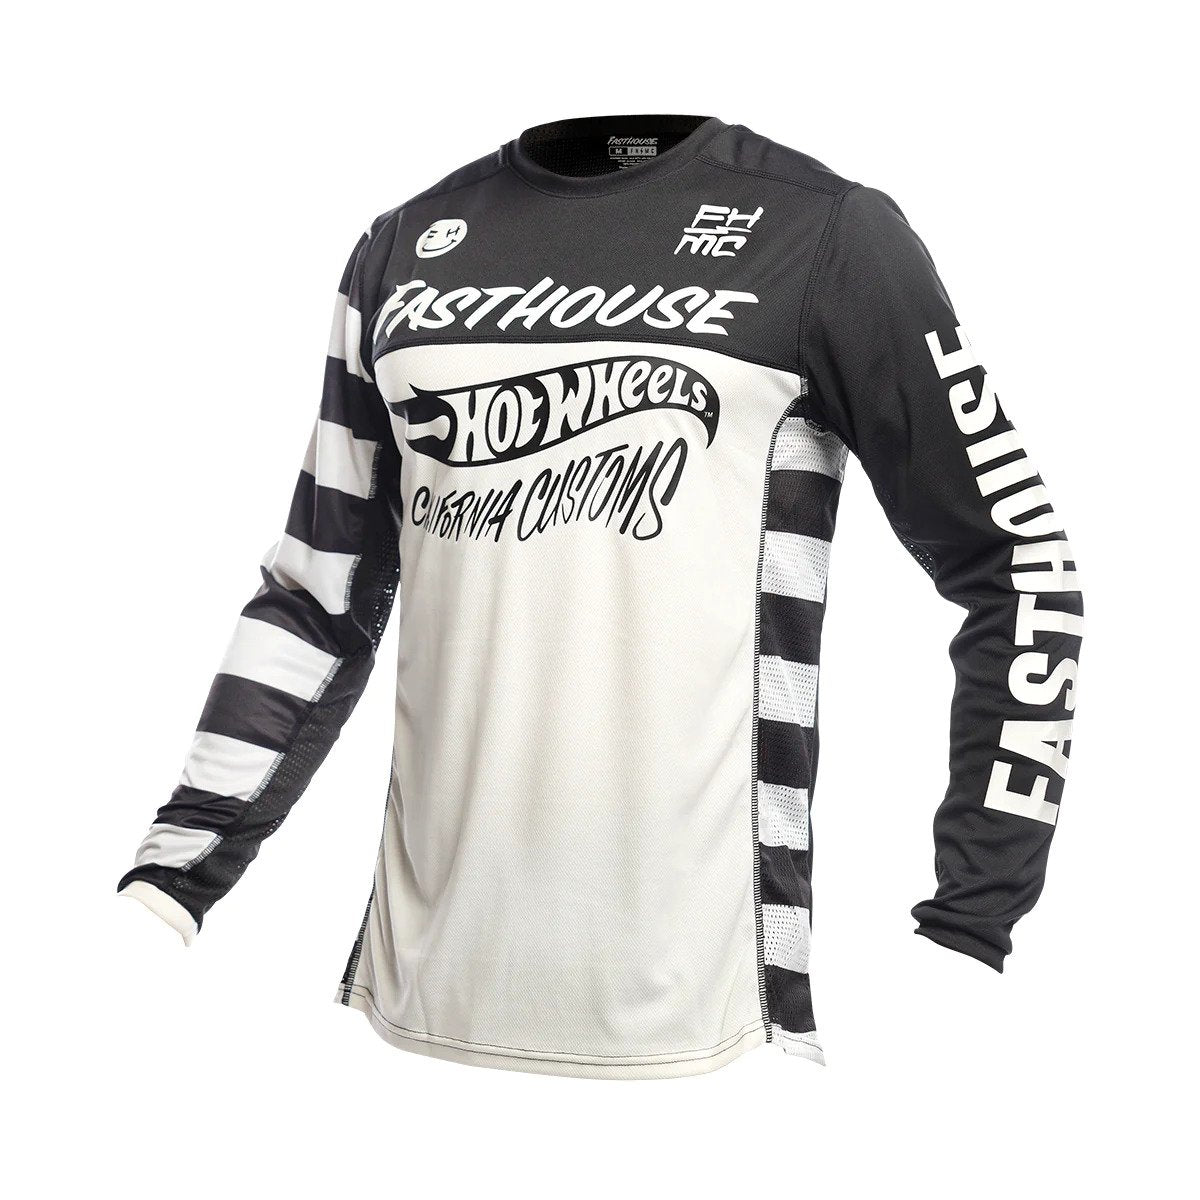 Jersey FASTHOUSE Para niño Grindhouse HOT WHEELS